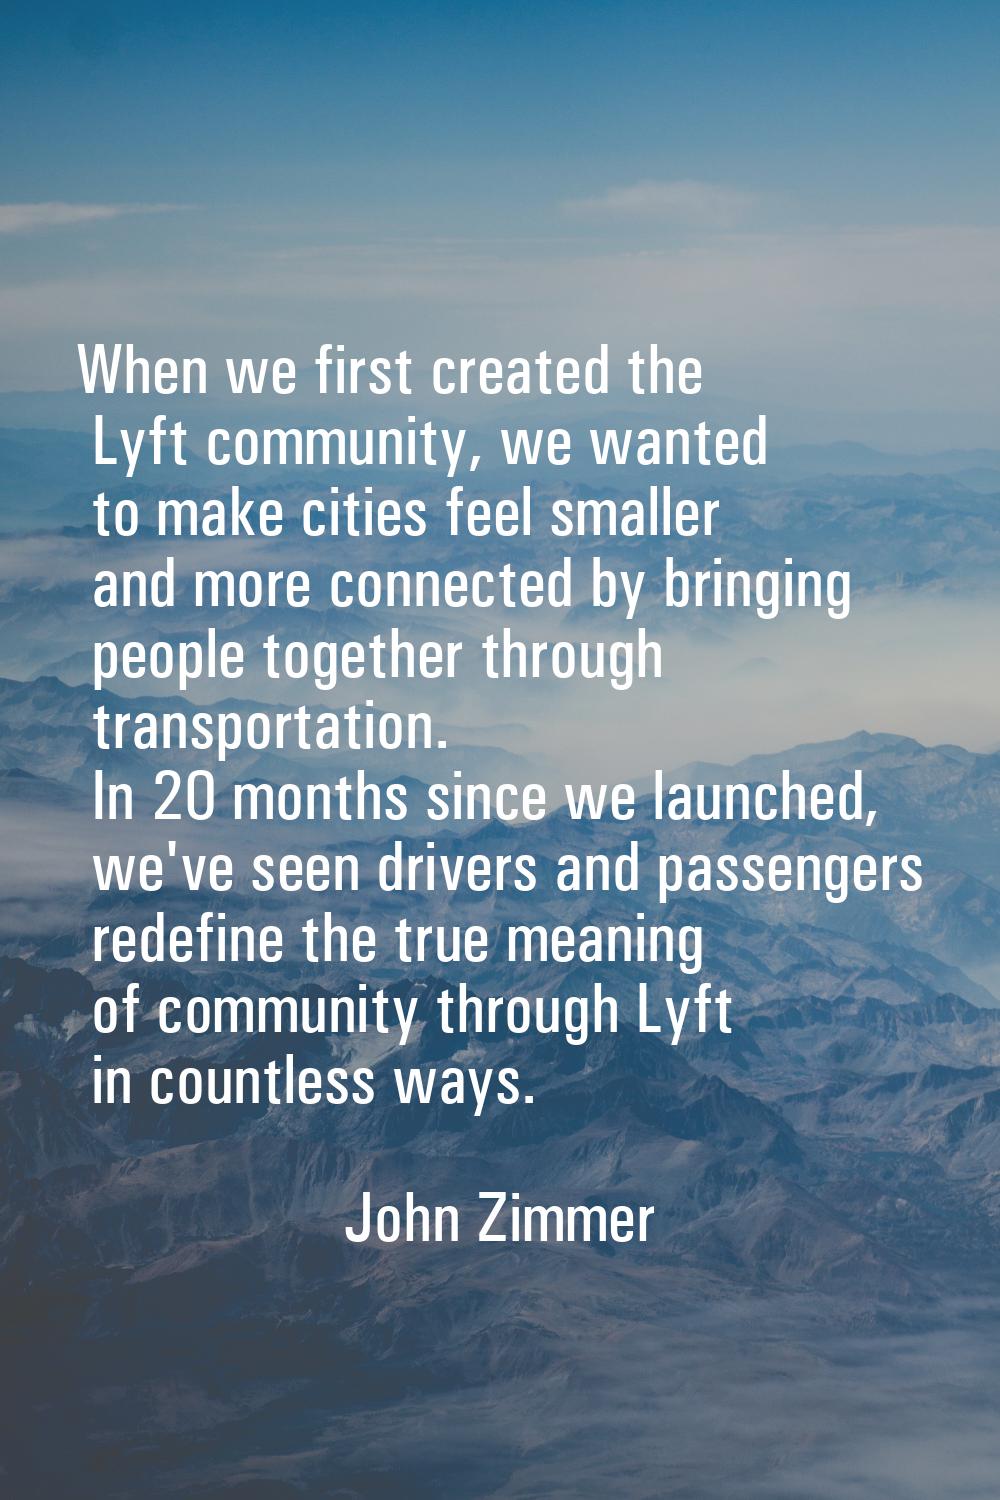 When we first created the Lyft community, we wanted to make cities feel smaller and more connected 